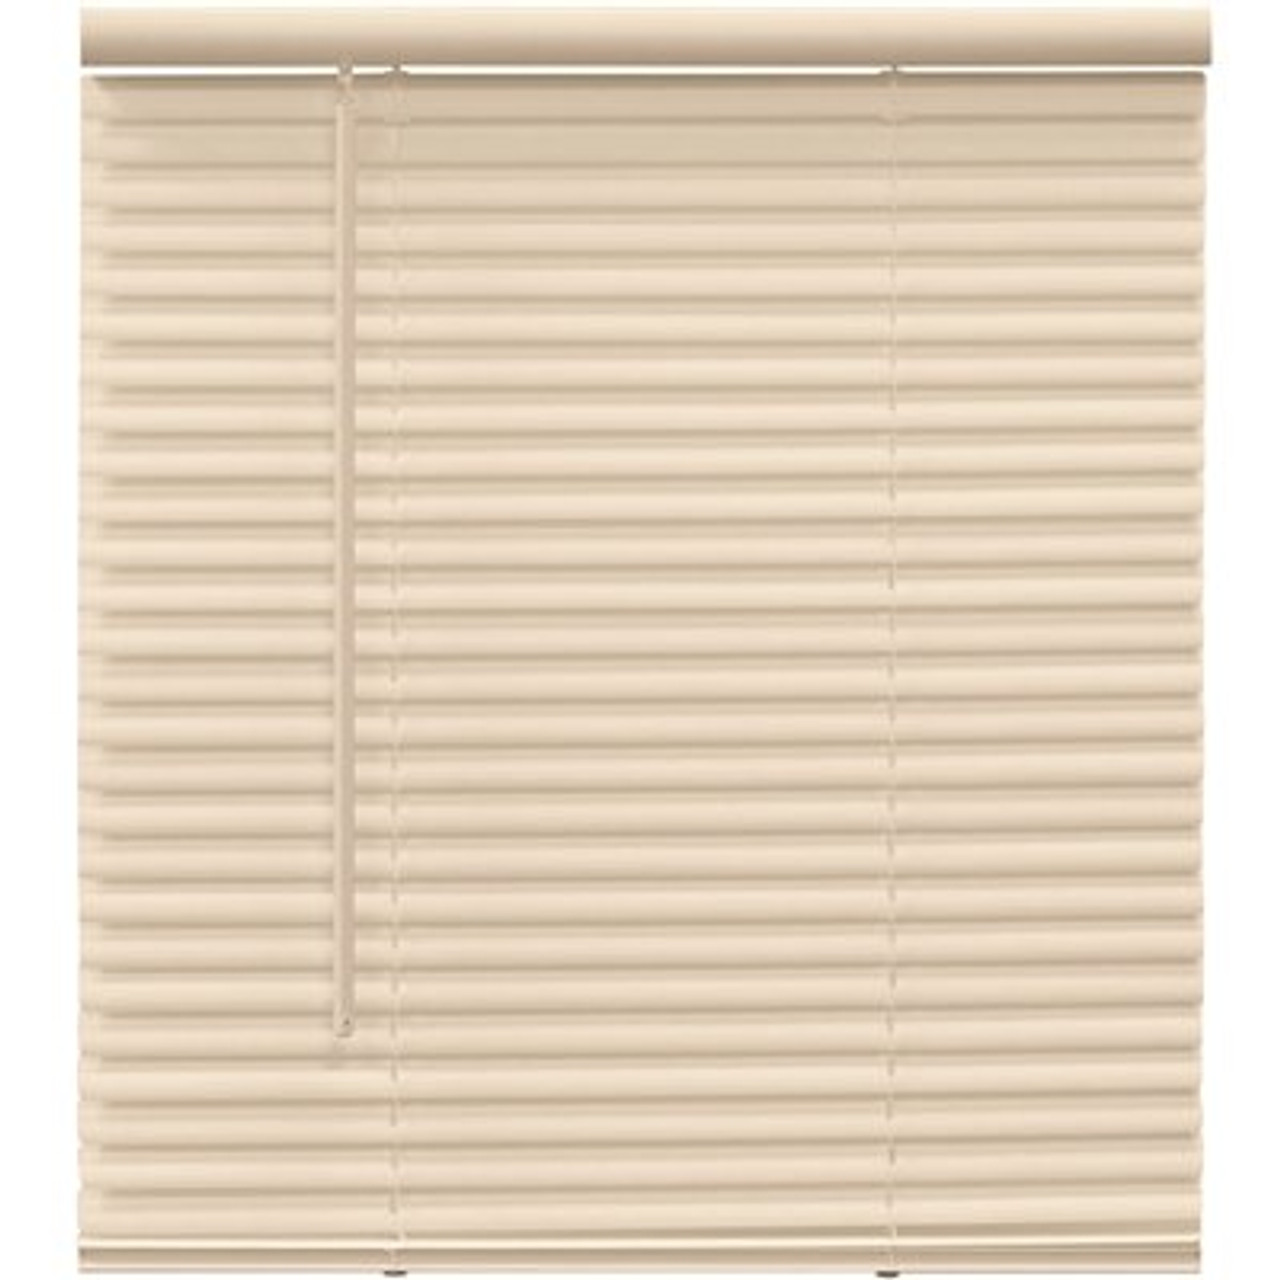 Champion Trutouch Alabaster Cordless Light Filtering Vinyl Mini Blinds With 1 In. Slats 31 In. W X 64 In. L